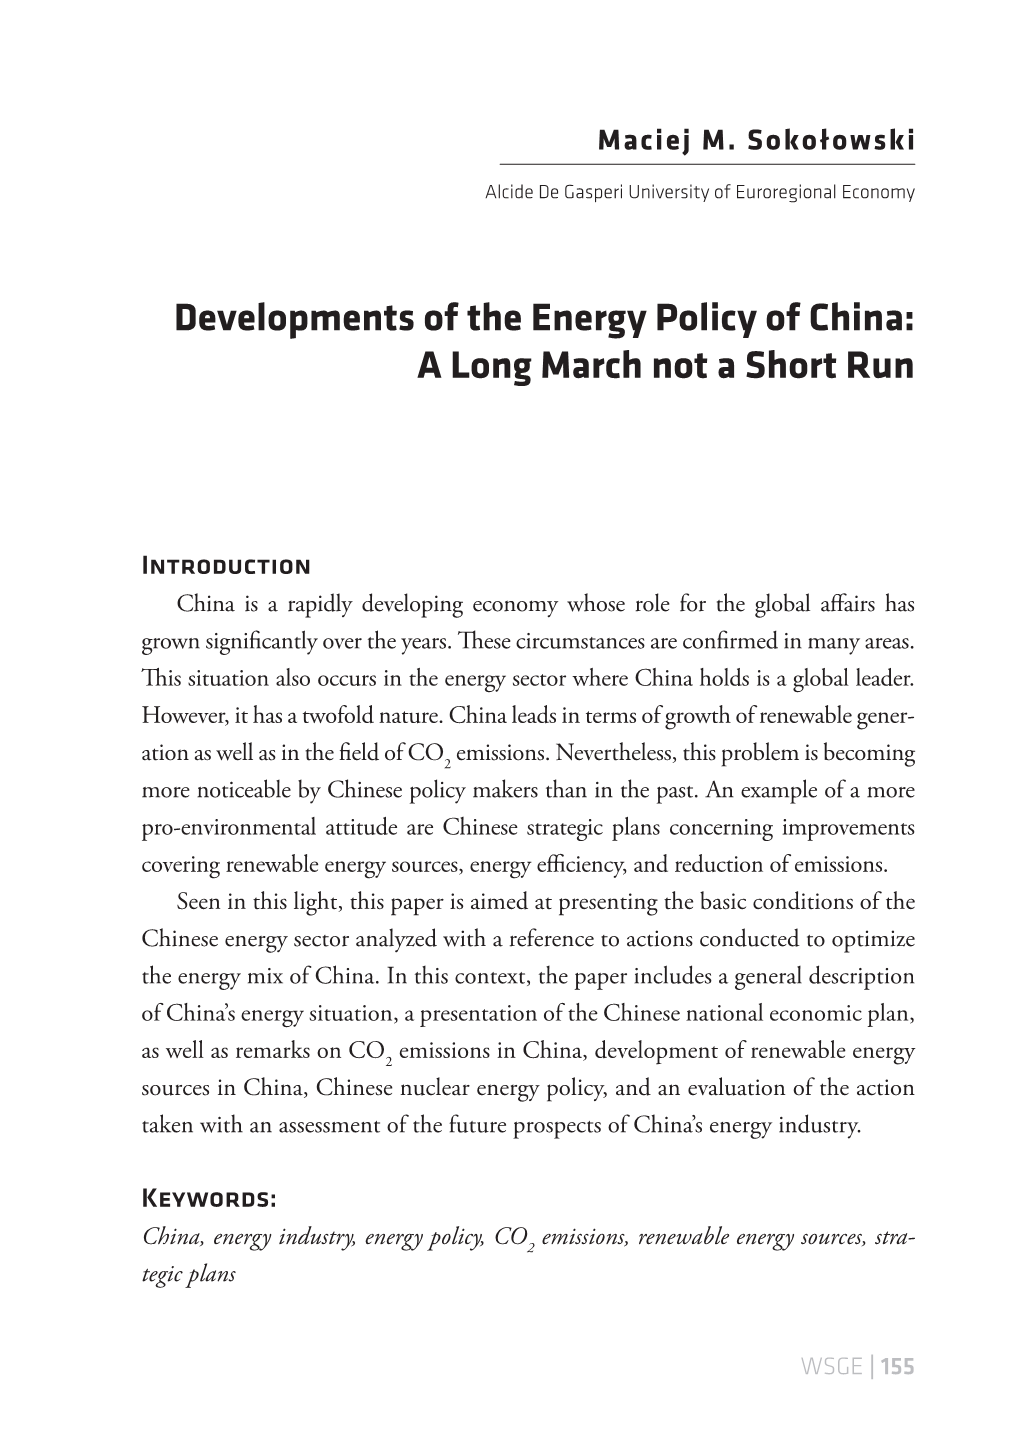 Developments of the Energy Policy of China: a Long March Not a Short Run